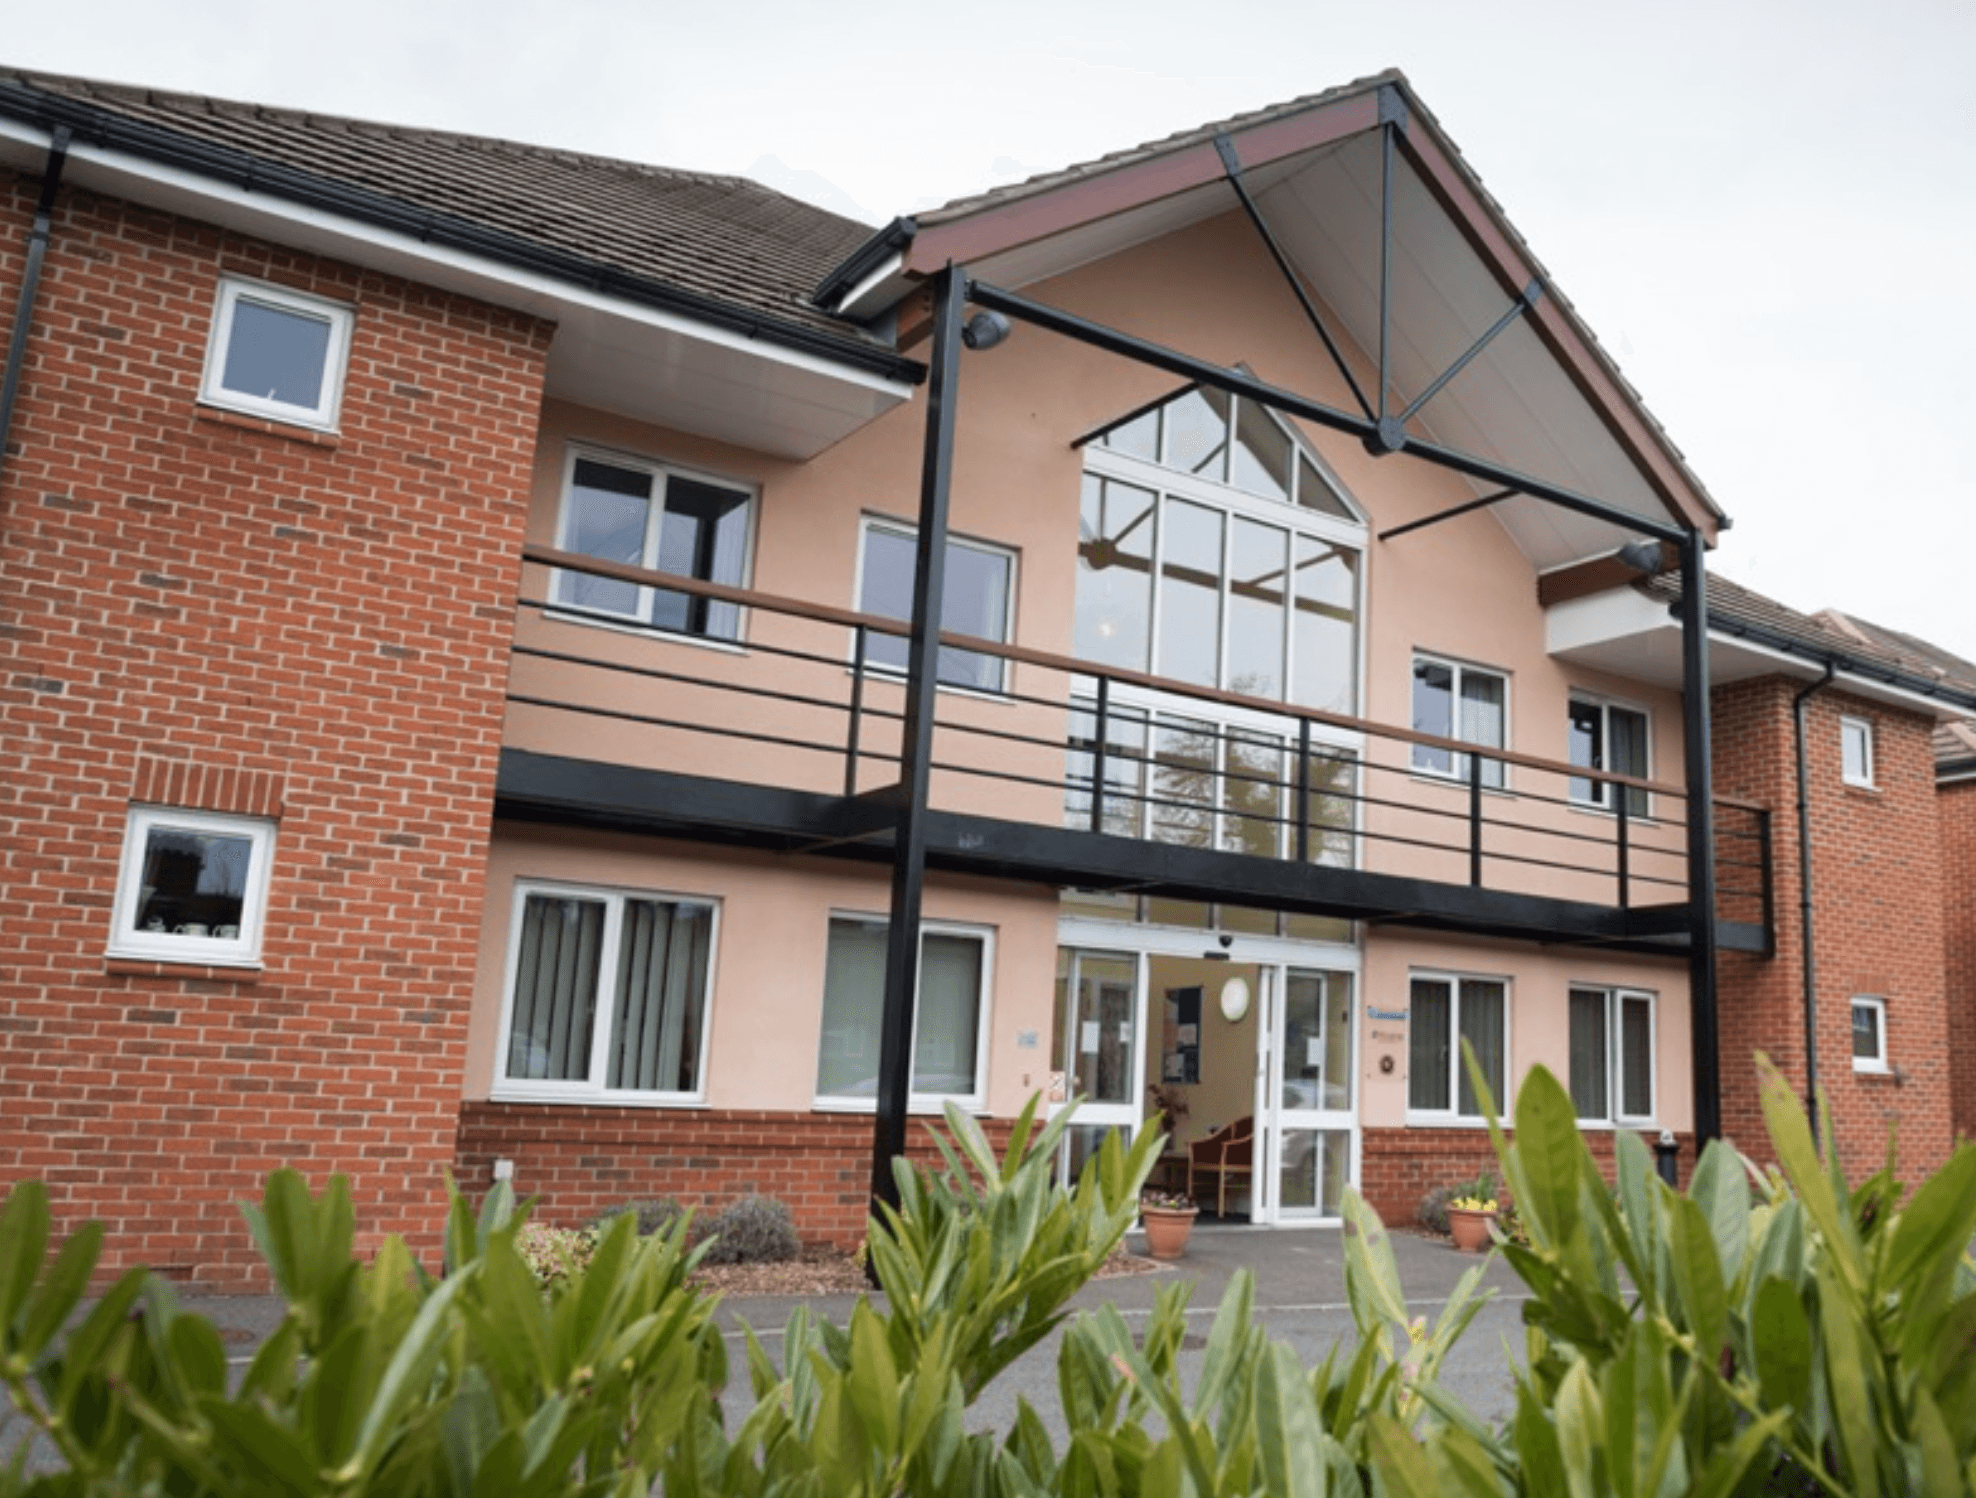 Icknield Court care home in Princes Risborough 1